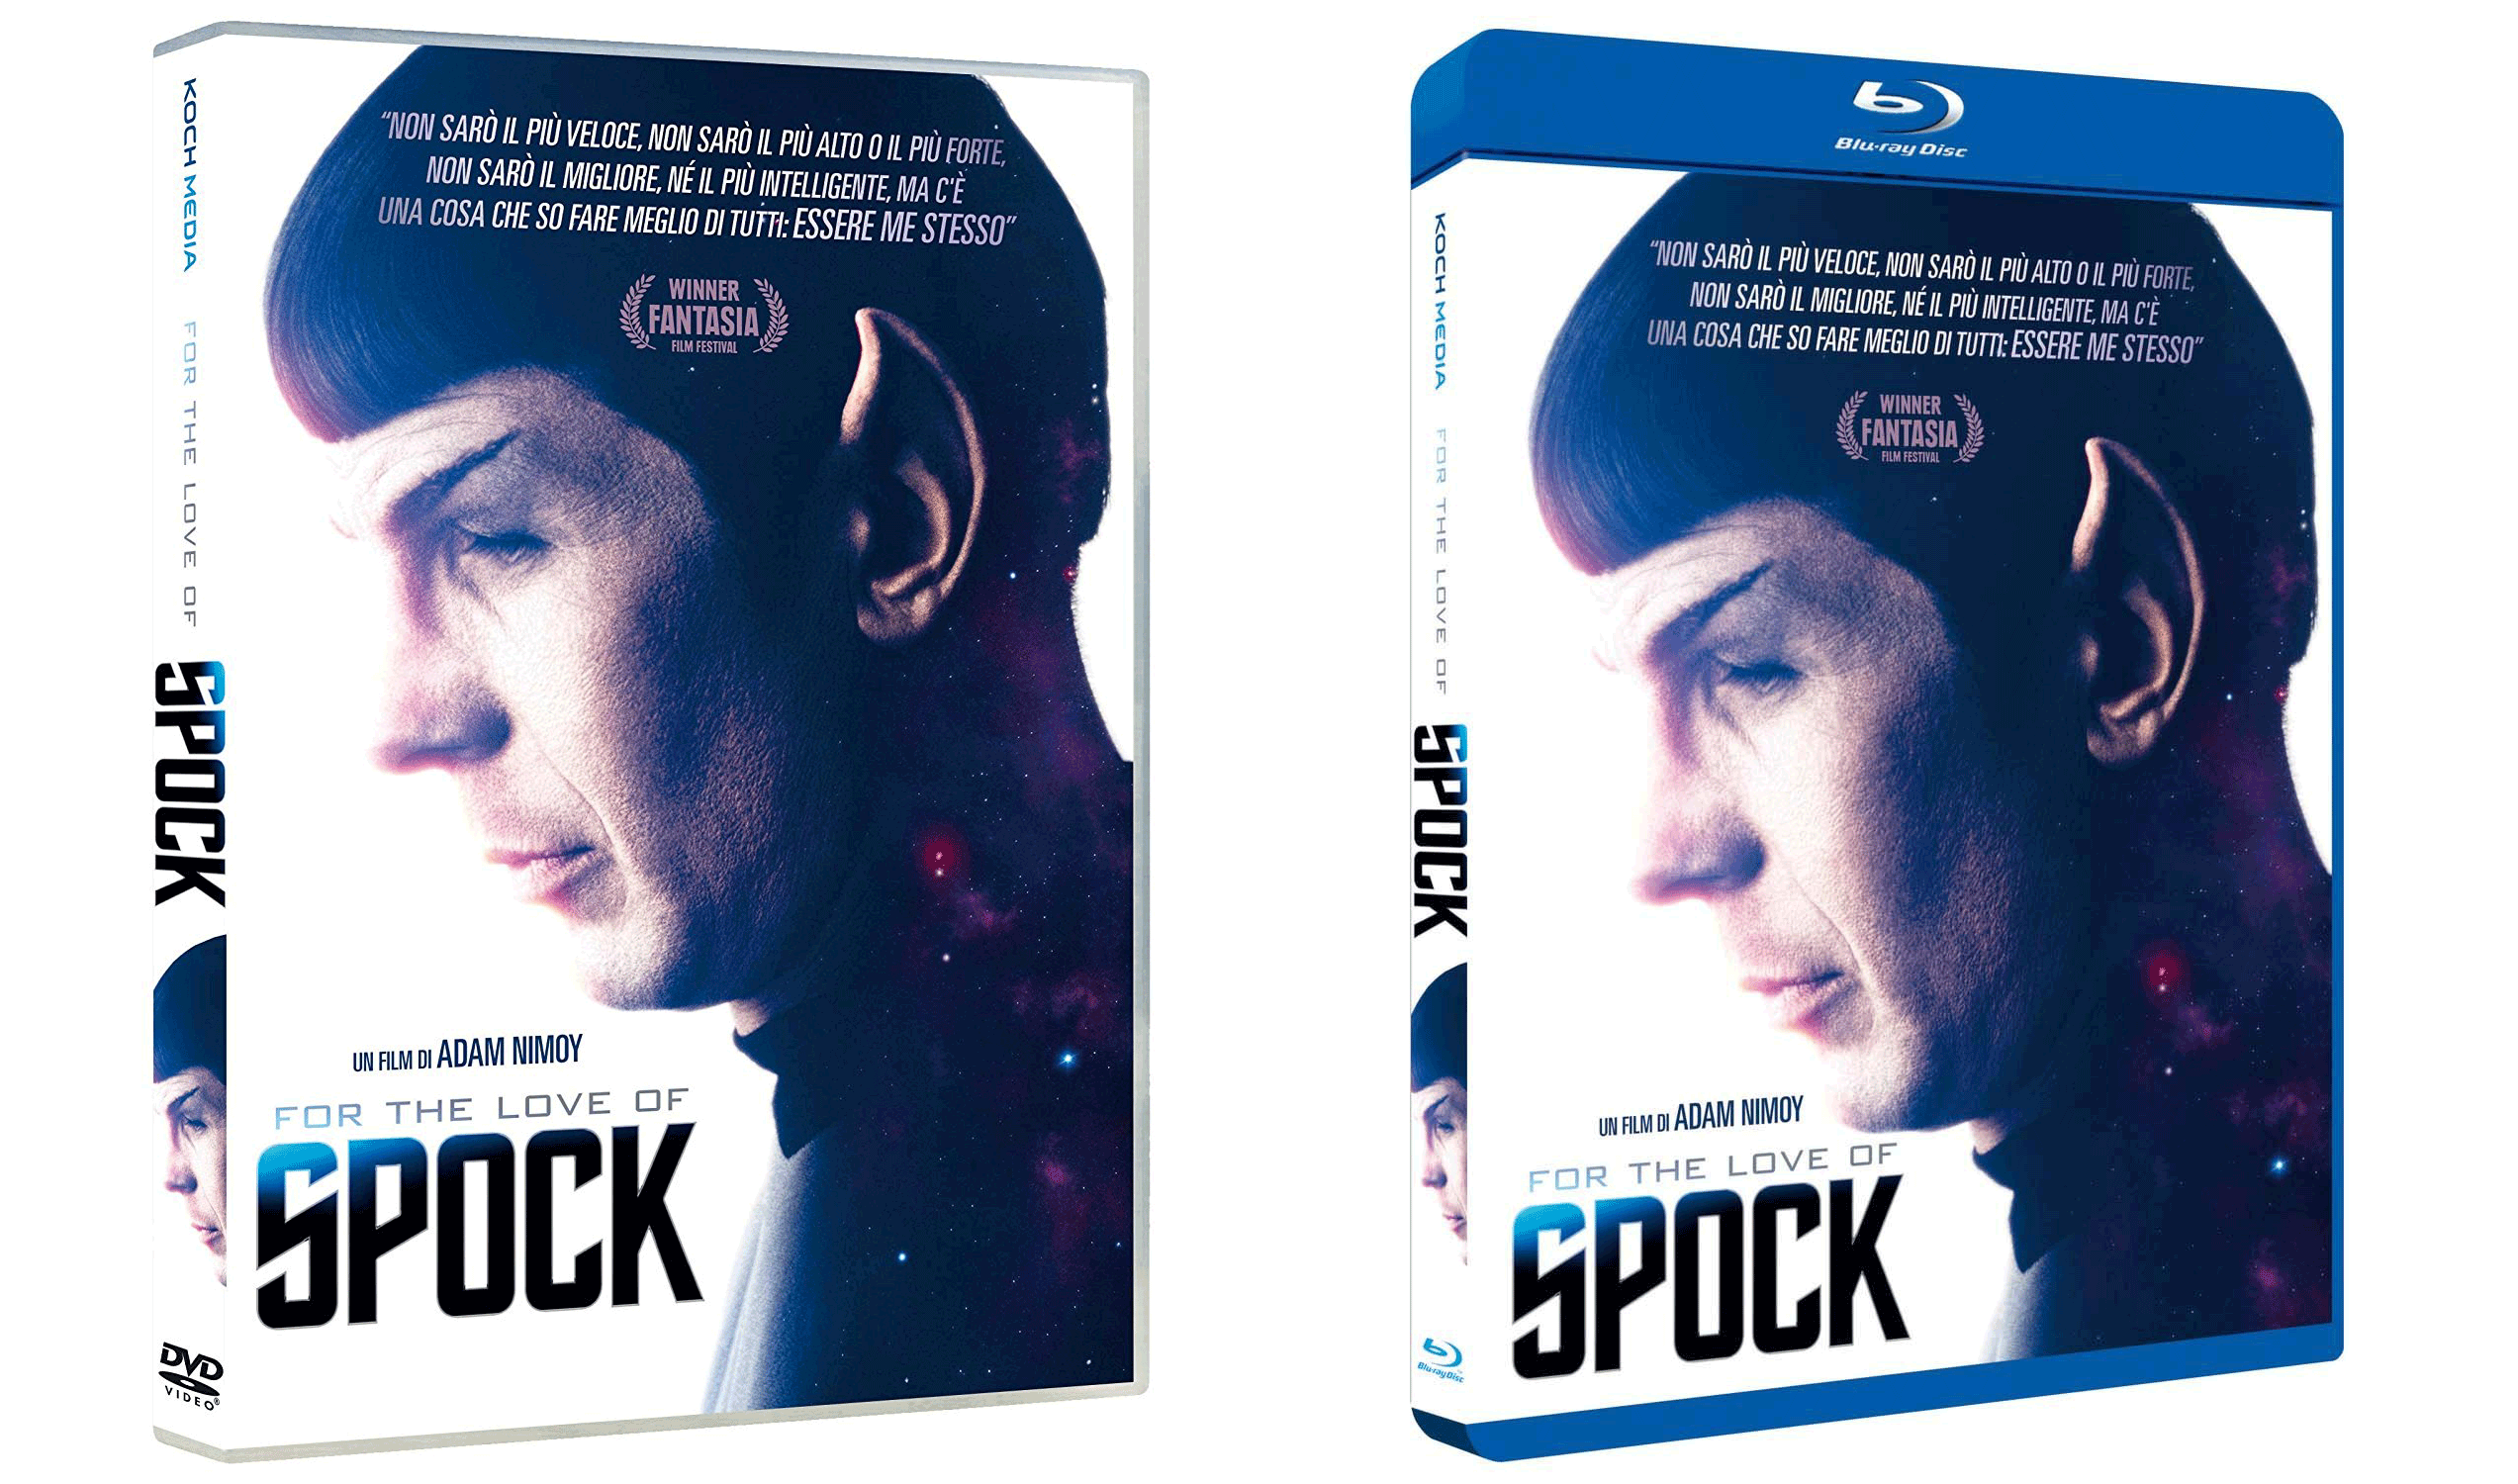 For the Love od Spock: DVD e Blu-ray